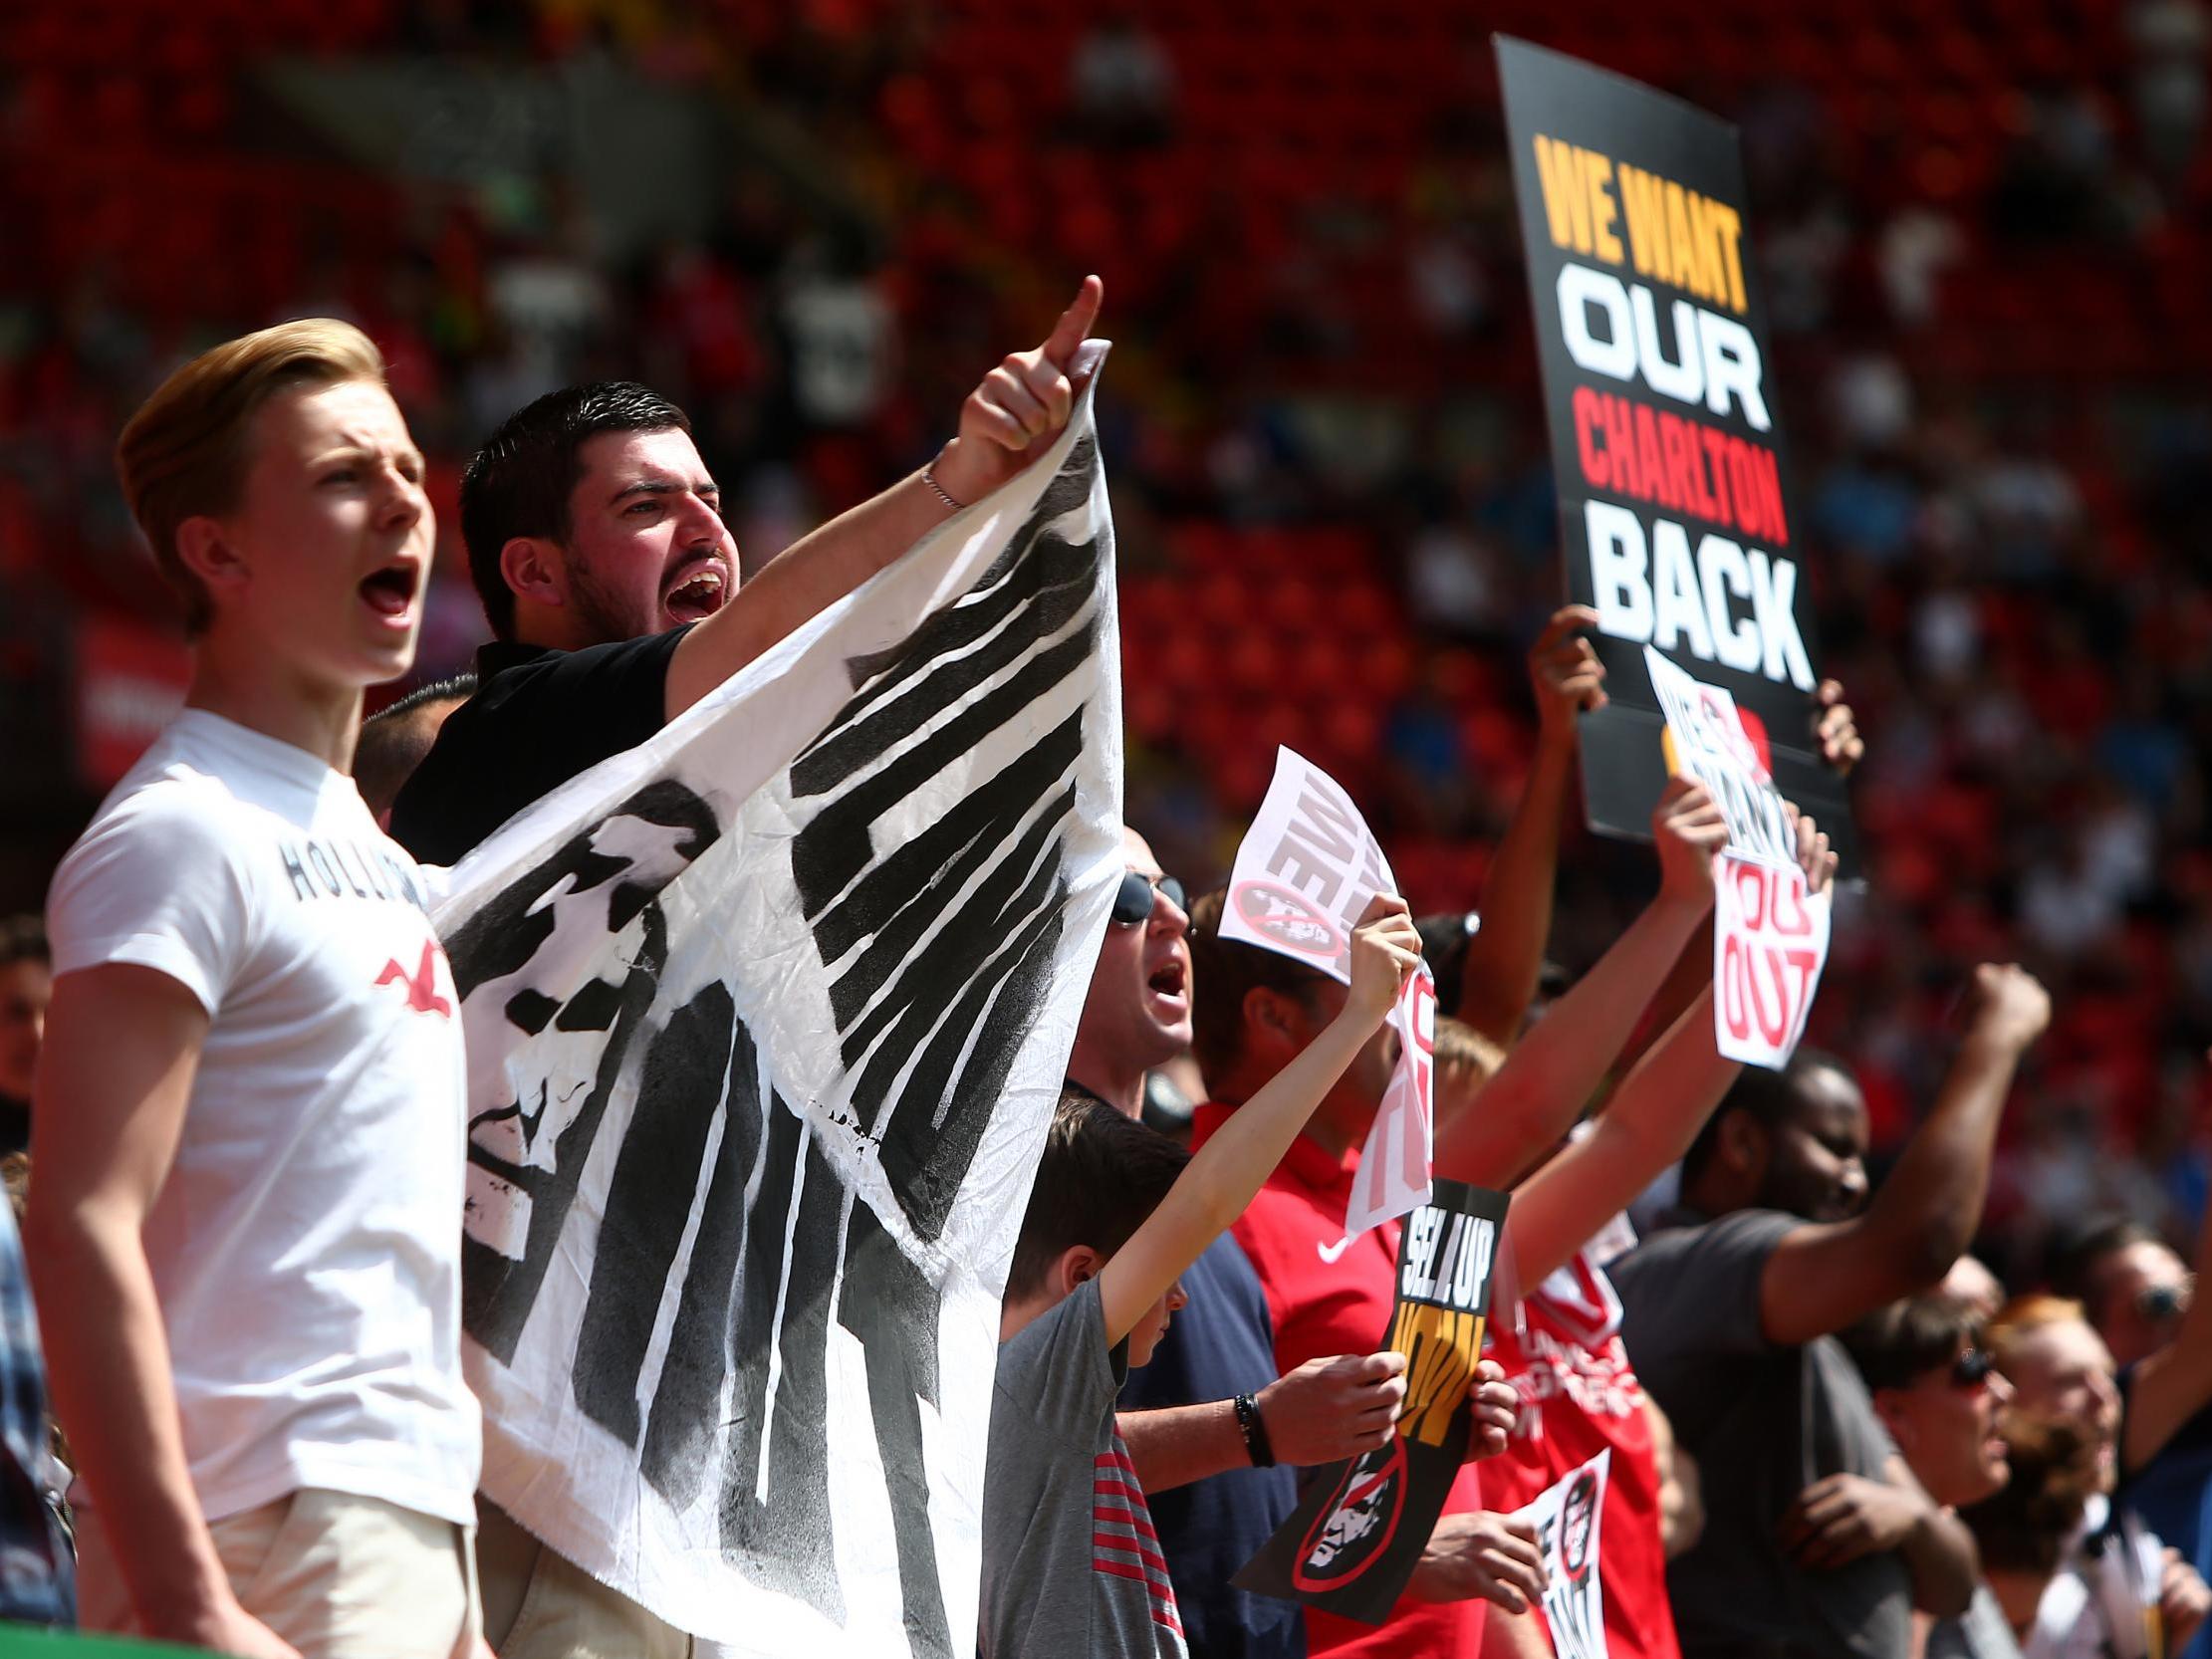 Charlton fans protest the ownership of Roland Duchatelet